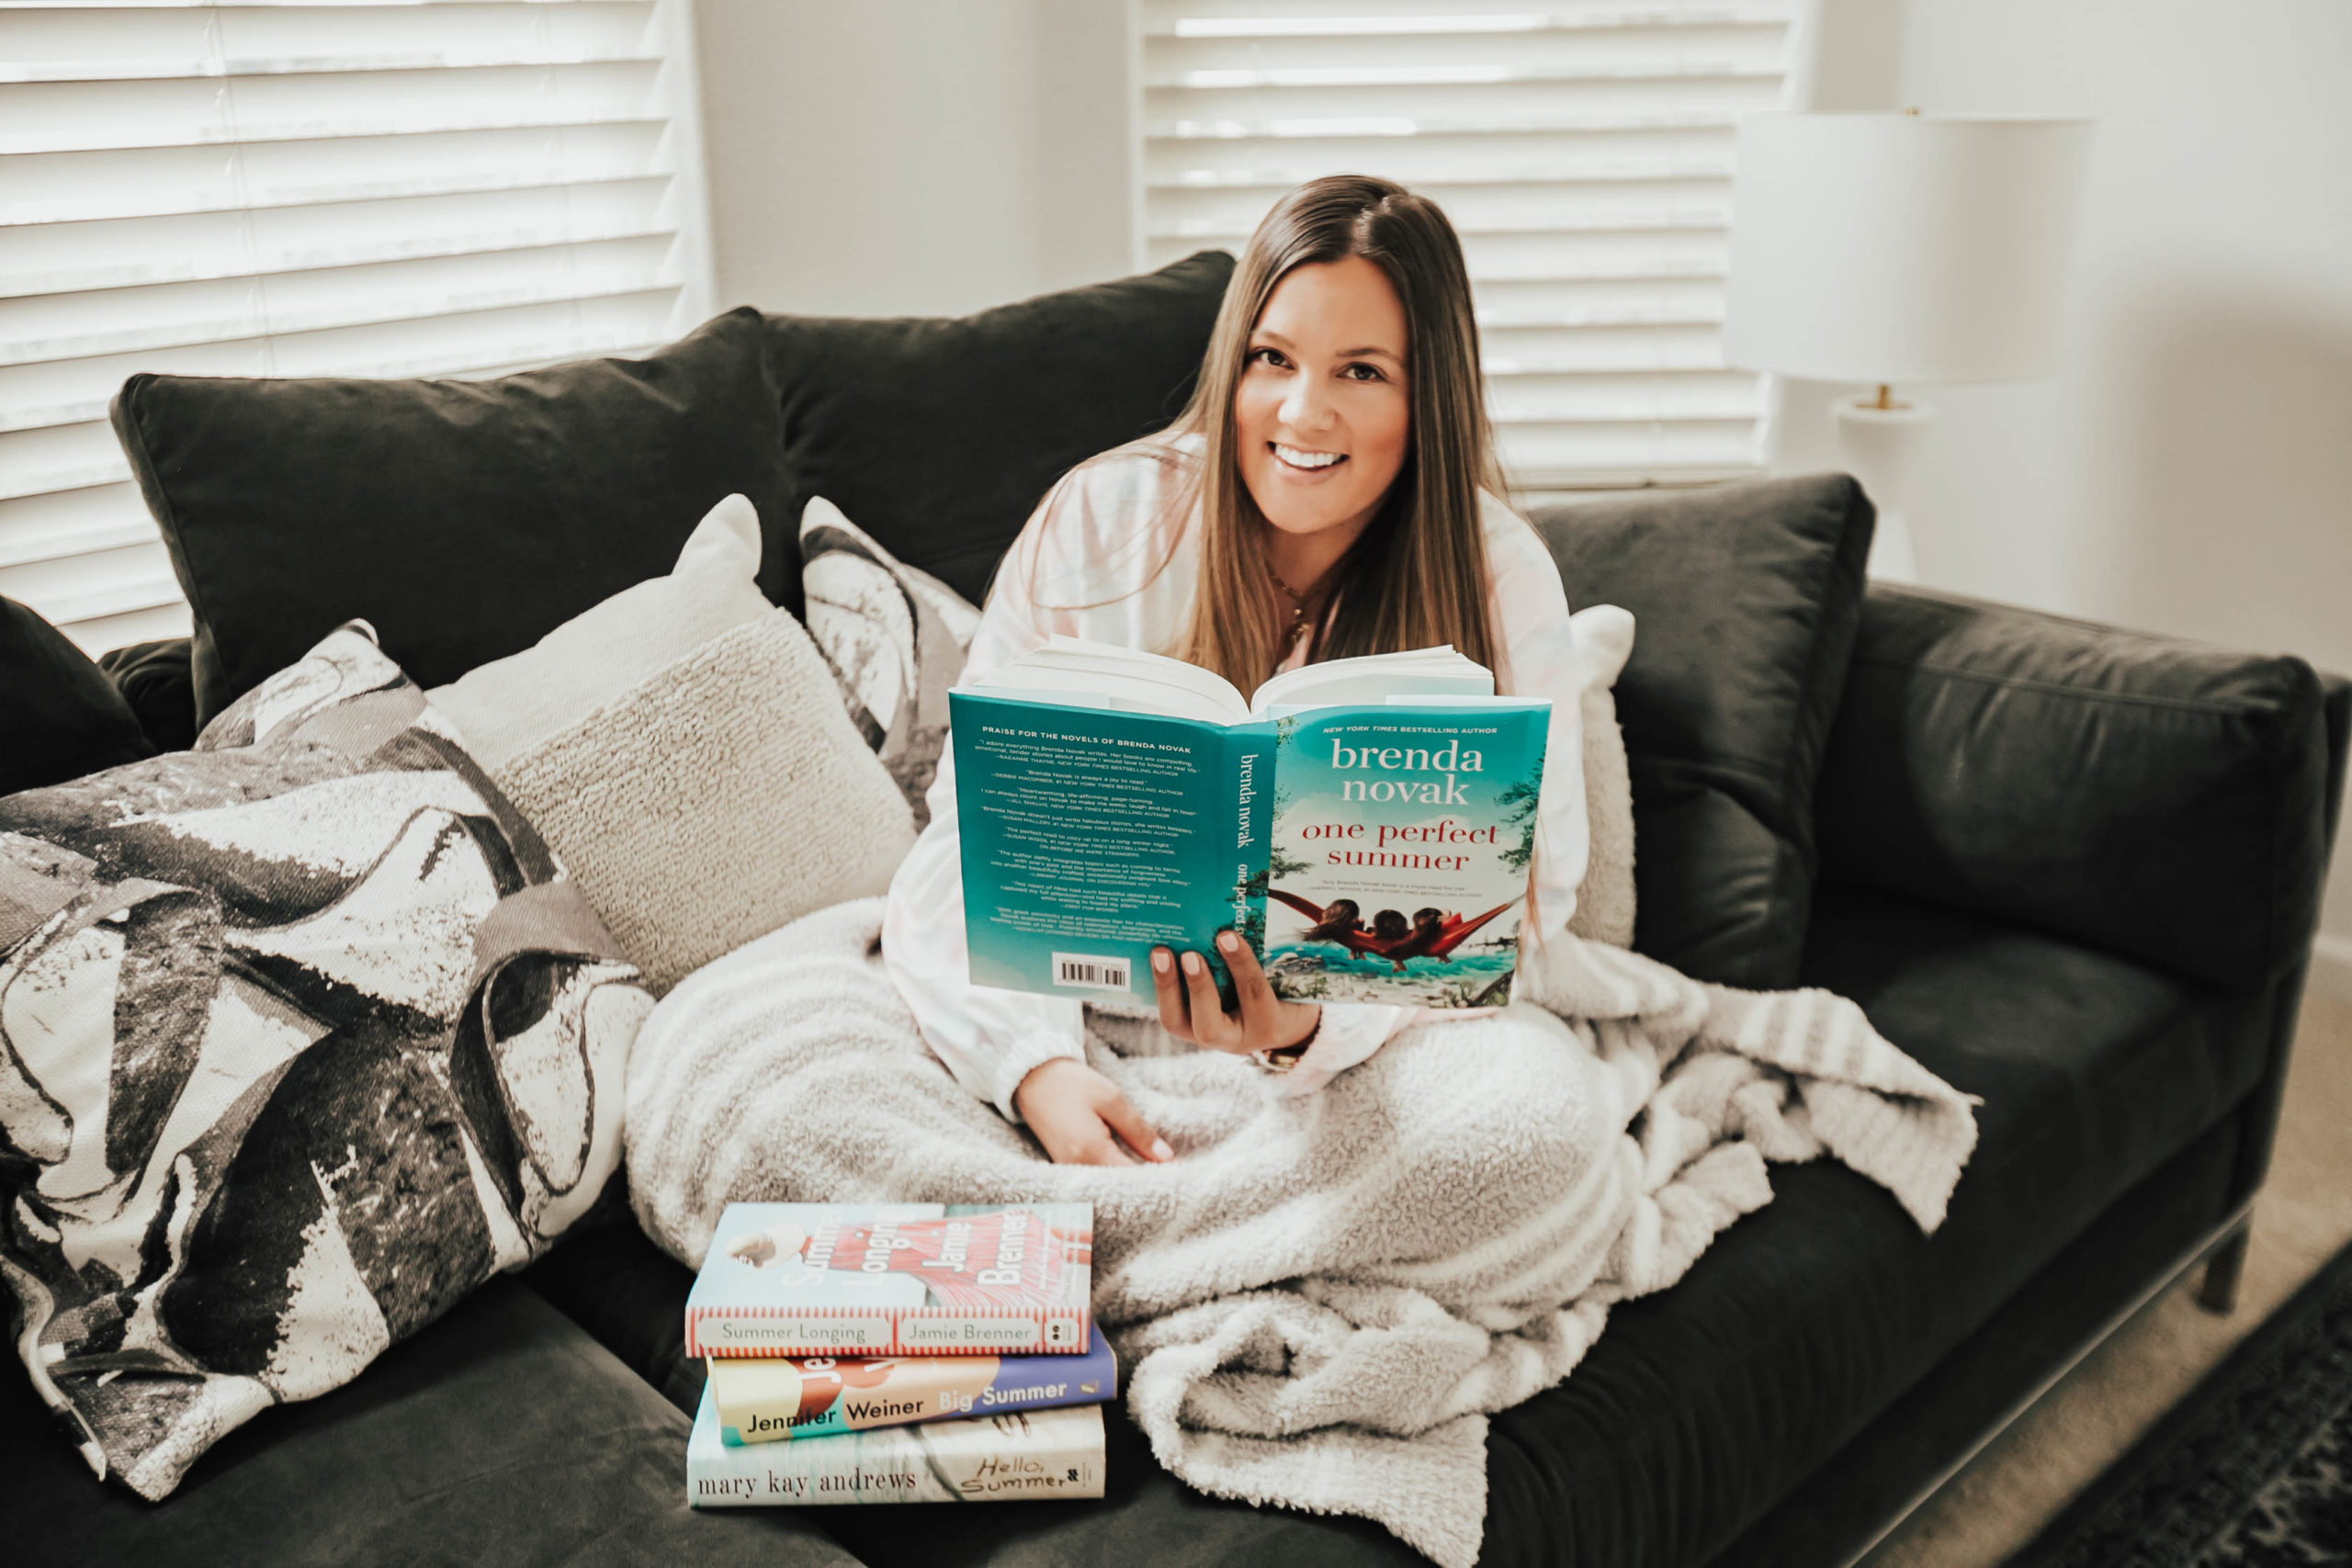 Reno blogger, Ashley Zeal from Two Peas in a Prada shares her May 2020 amazon favorites - all the best items she bought from Amazon last month!